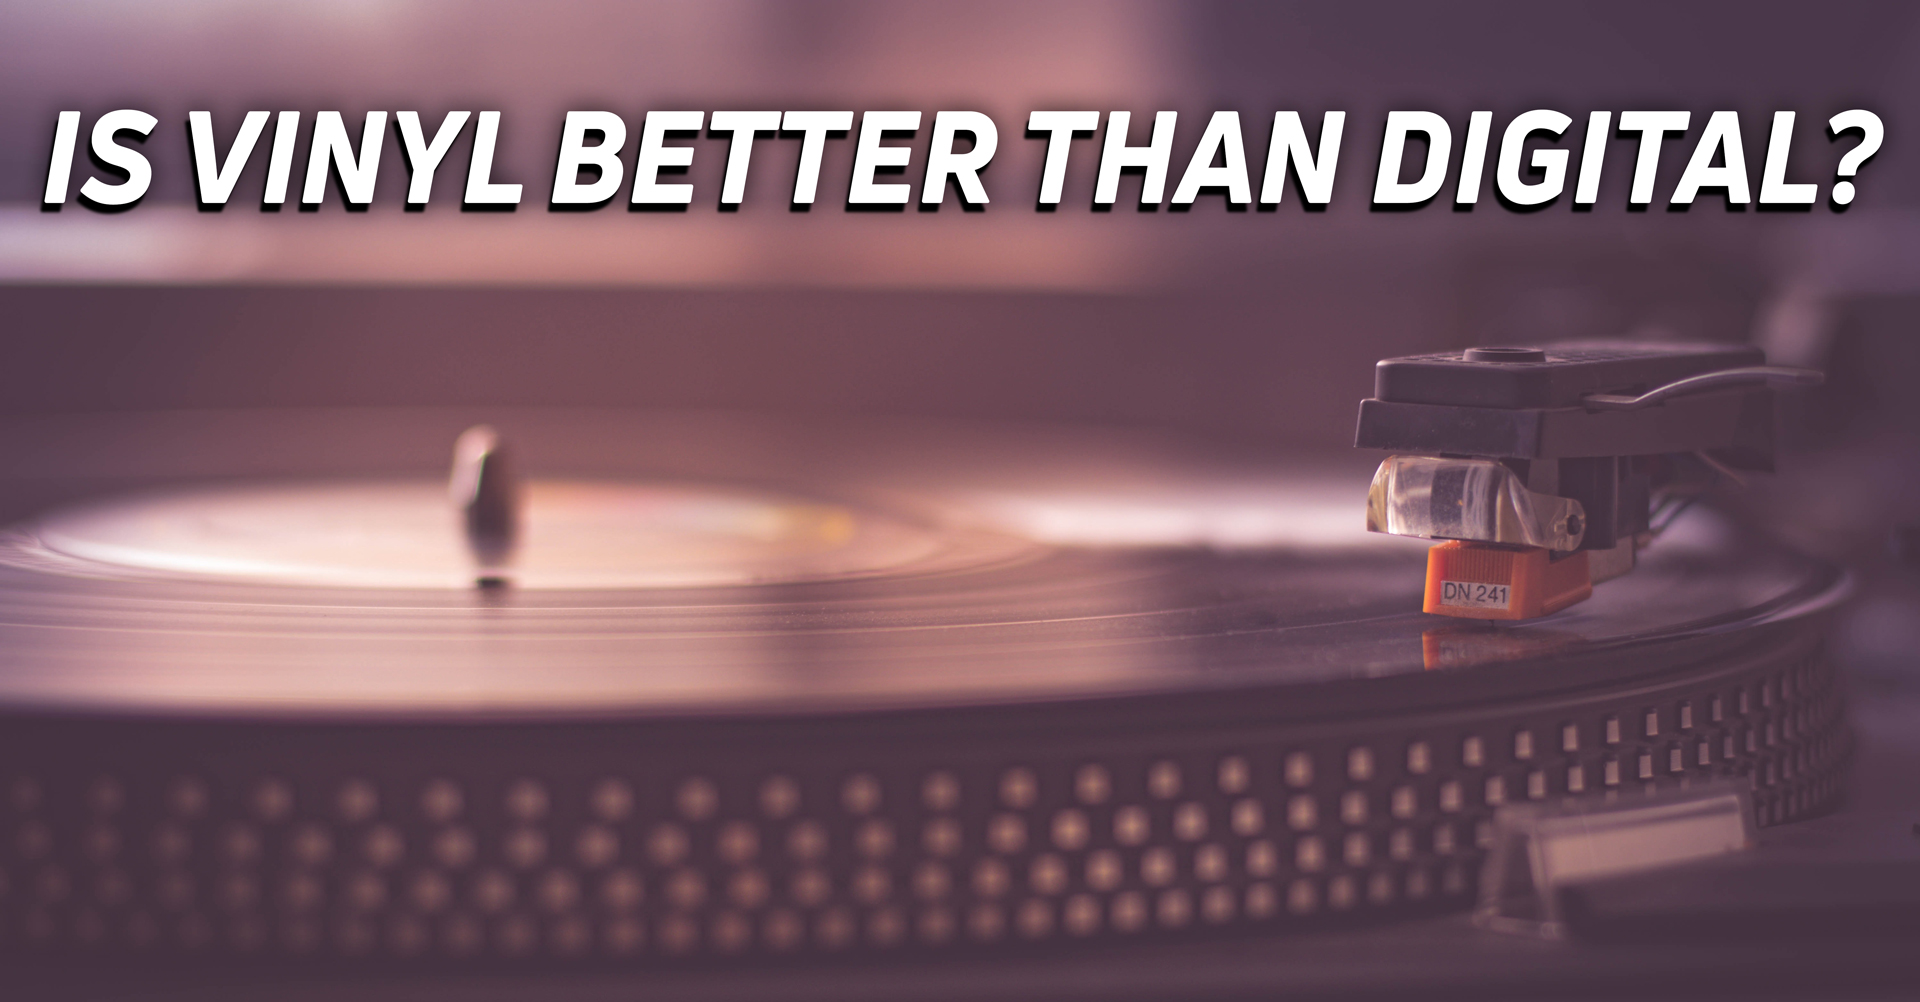 Close up image of a turntable with text: "Is vinyl better than digital?"